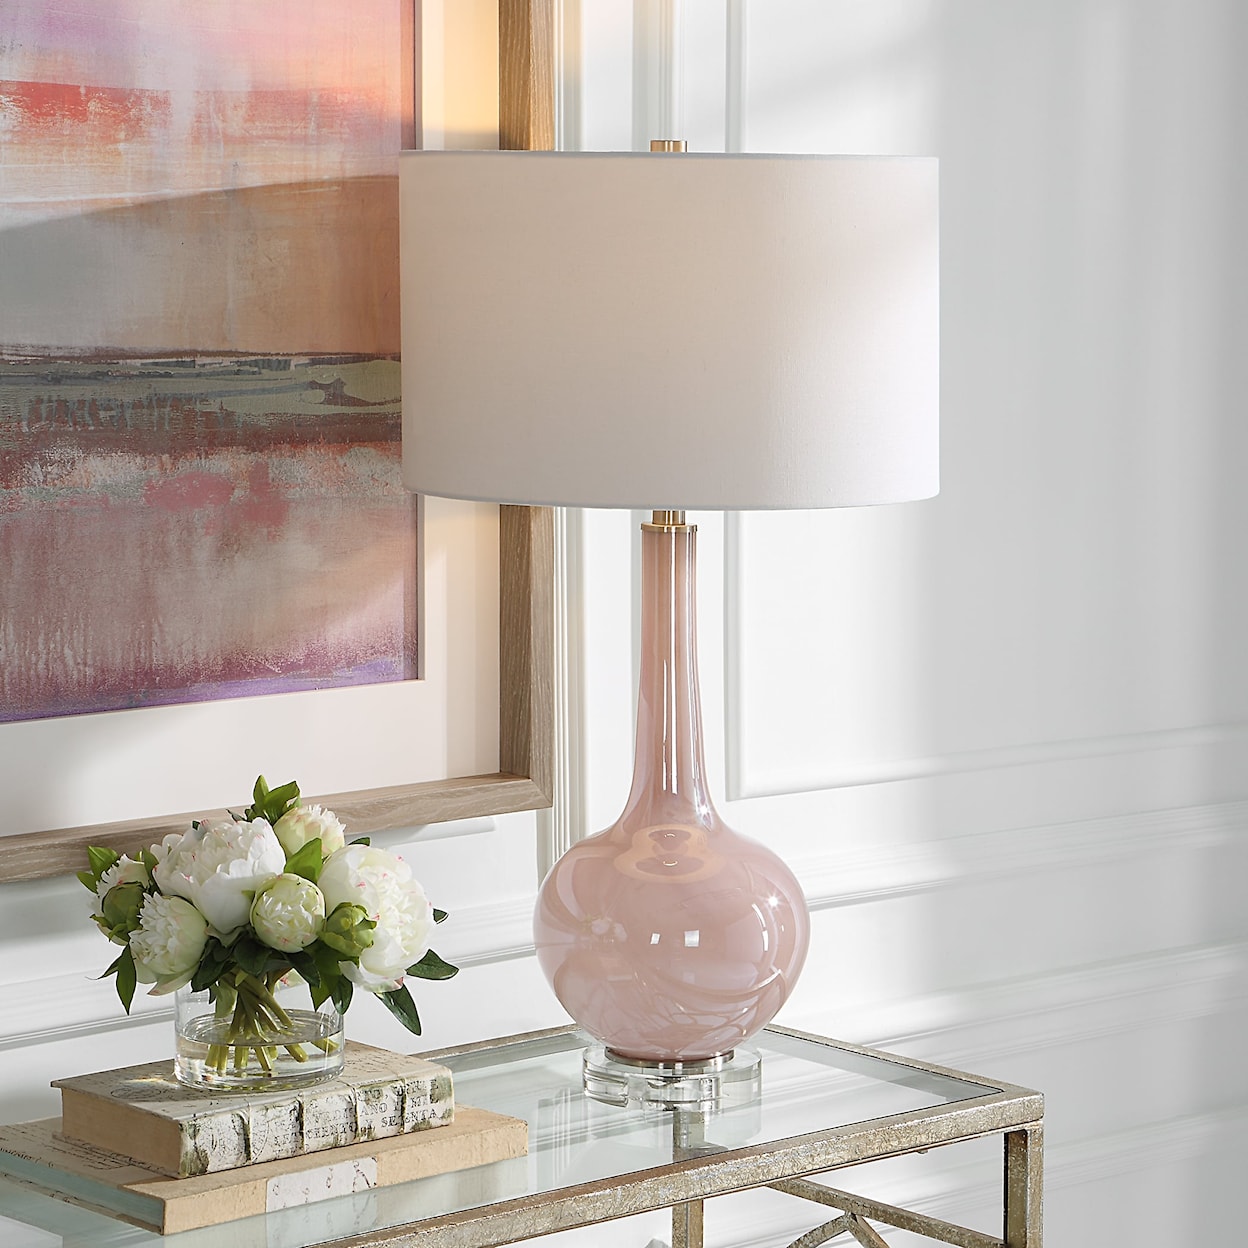 Uttermost Rosa Rosa Pink Glass Table Lamp